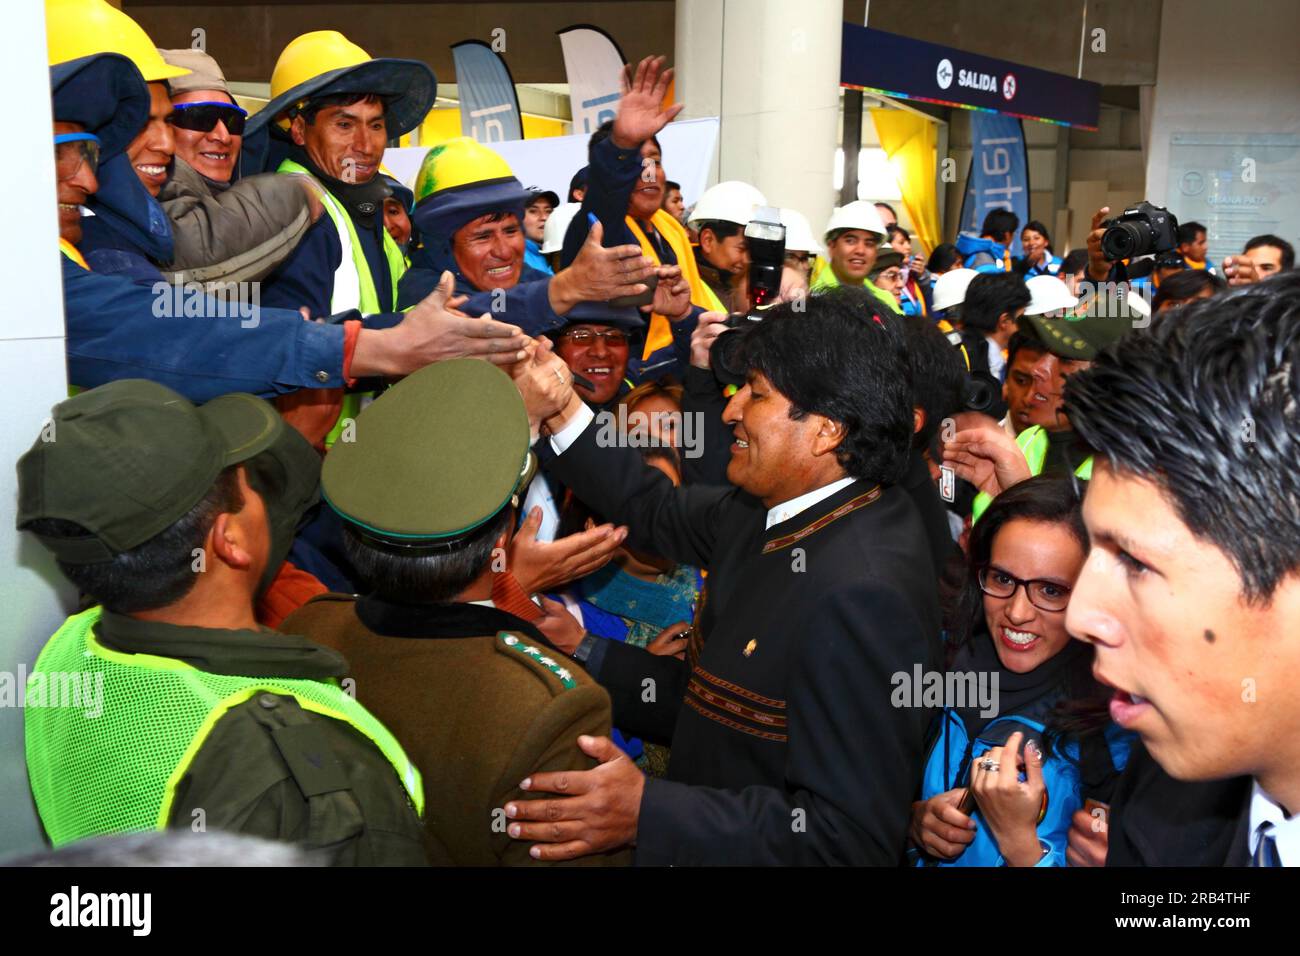 El Alto, Bolivia, 15th September 2014. Bolivian president Evo Morales (centre) greets Mi Teleferico company workers as he arrives at the station in Ciudad Satelite for the opening ceremony of the Yellow Line. The Yellow Line is the second of three cable car lines to be opened this year, and is part of an ambitious project to relieve traffic congestion. The first line opened in May, when all three are open they will be the world's longest urban cable car system. The system has been built by the Austrian company Doppelmayr. Stock Photo